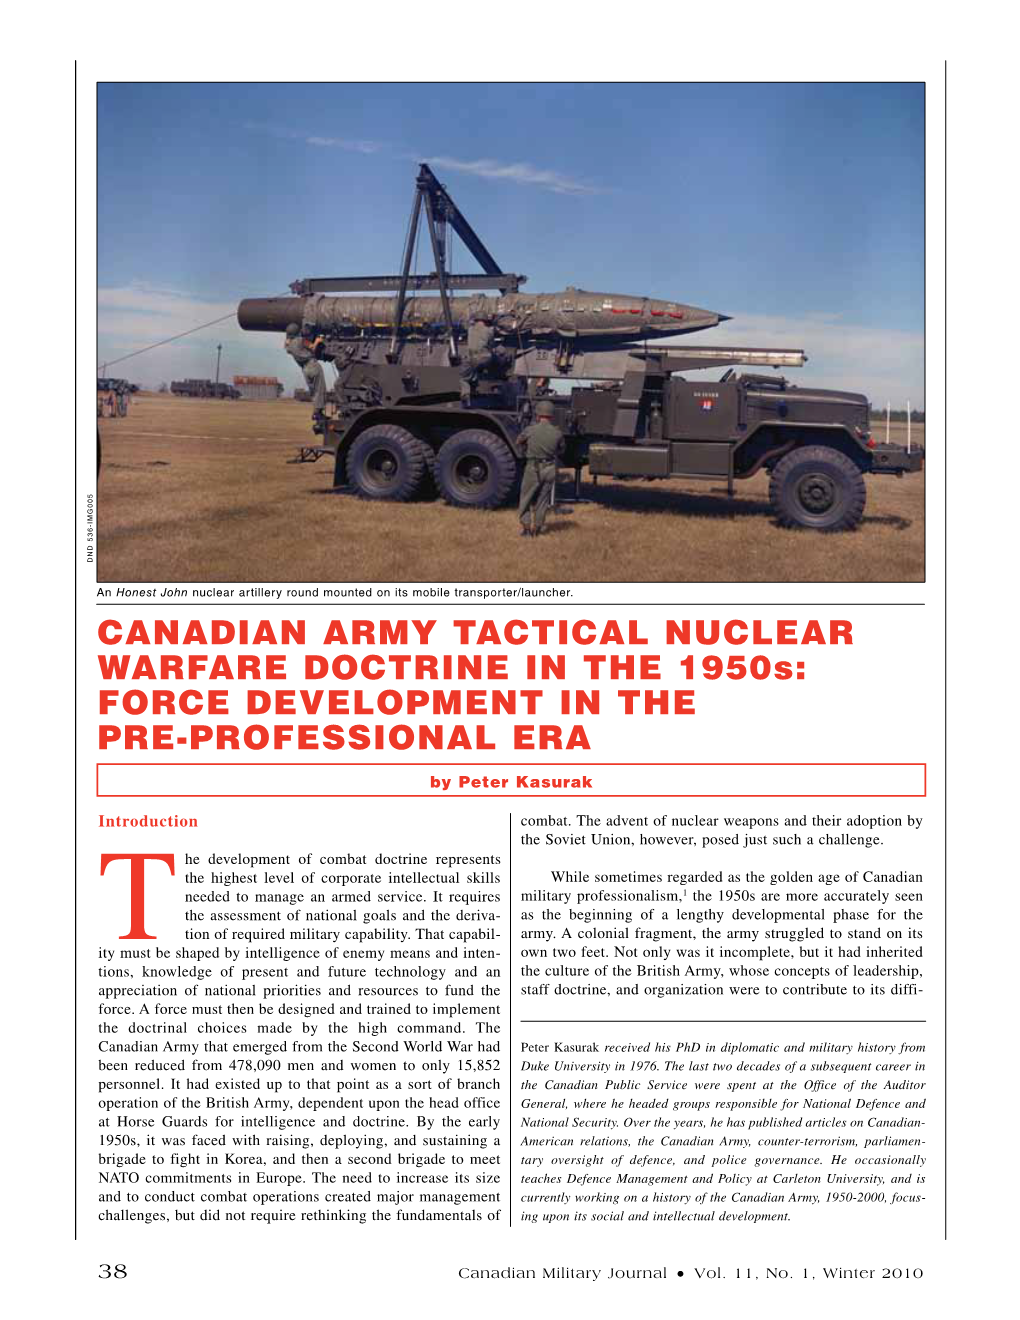 Canadian Army Tactical Nuclear Warfare Doctrine in the 1950S: Force Development in the Pre-Professional Era